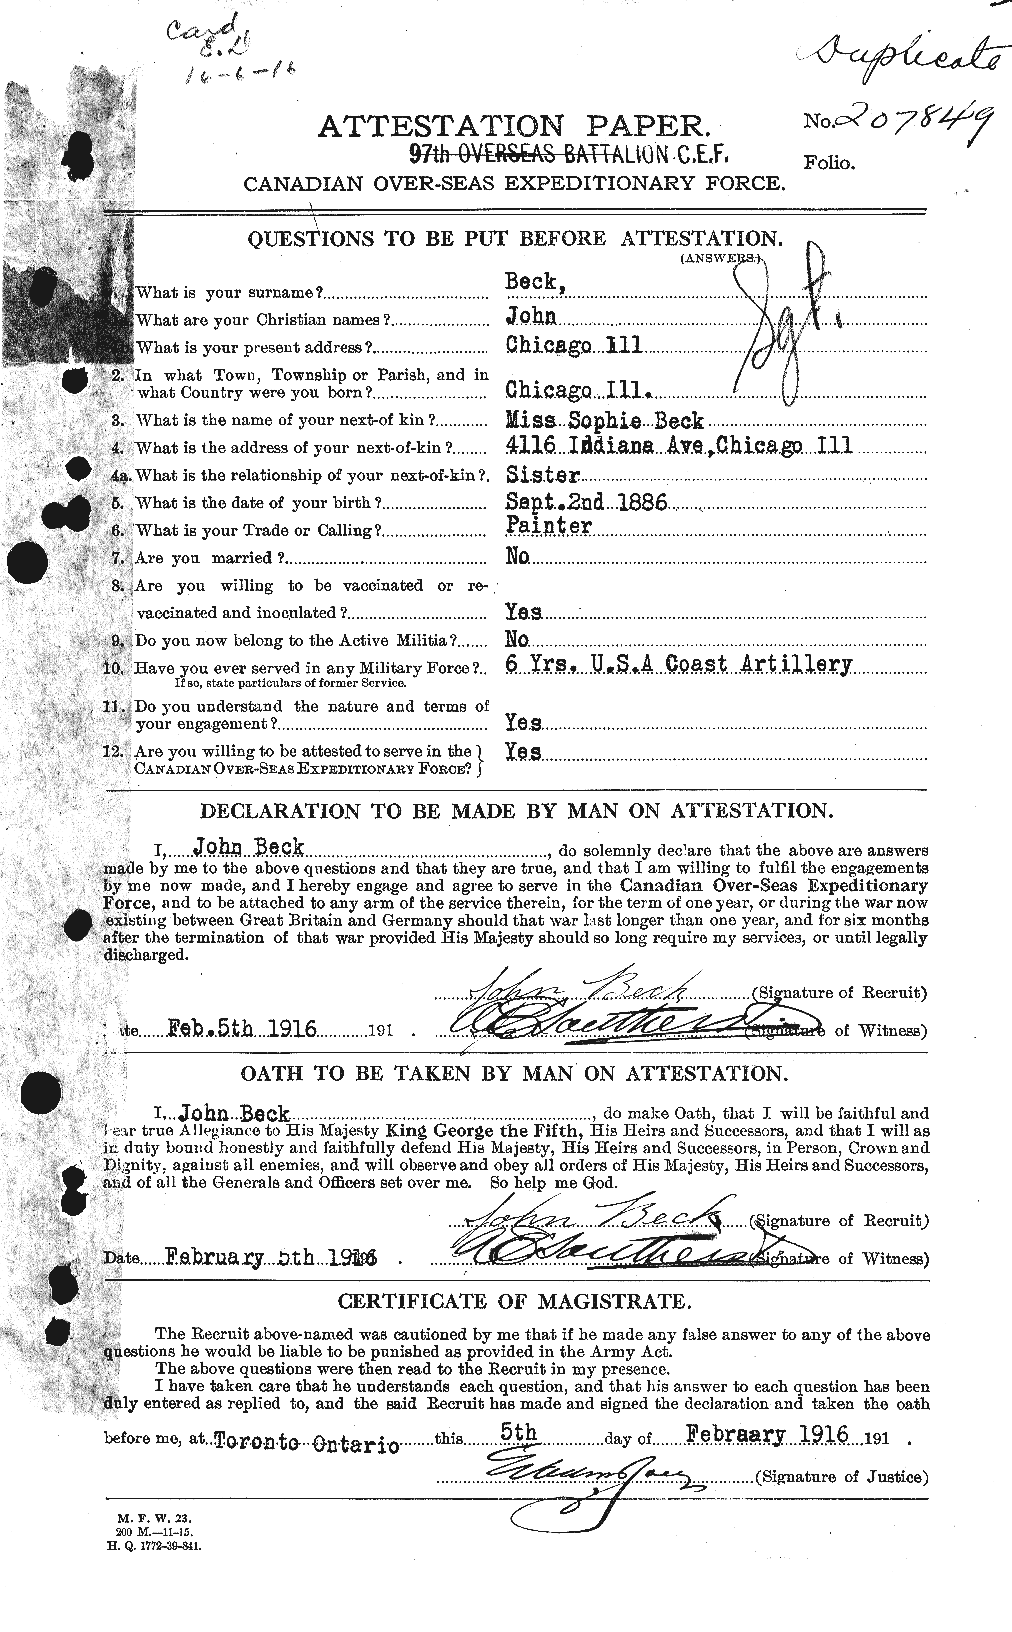 Personnel Records of the First World War - CEF 232168a